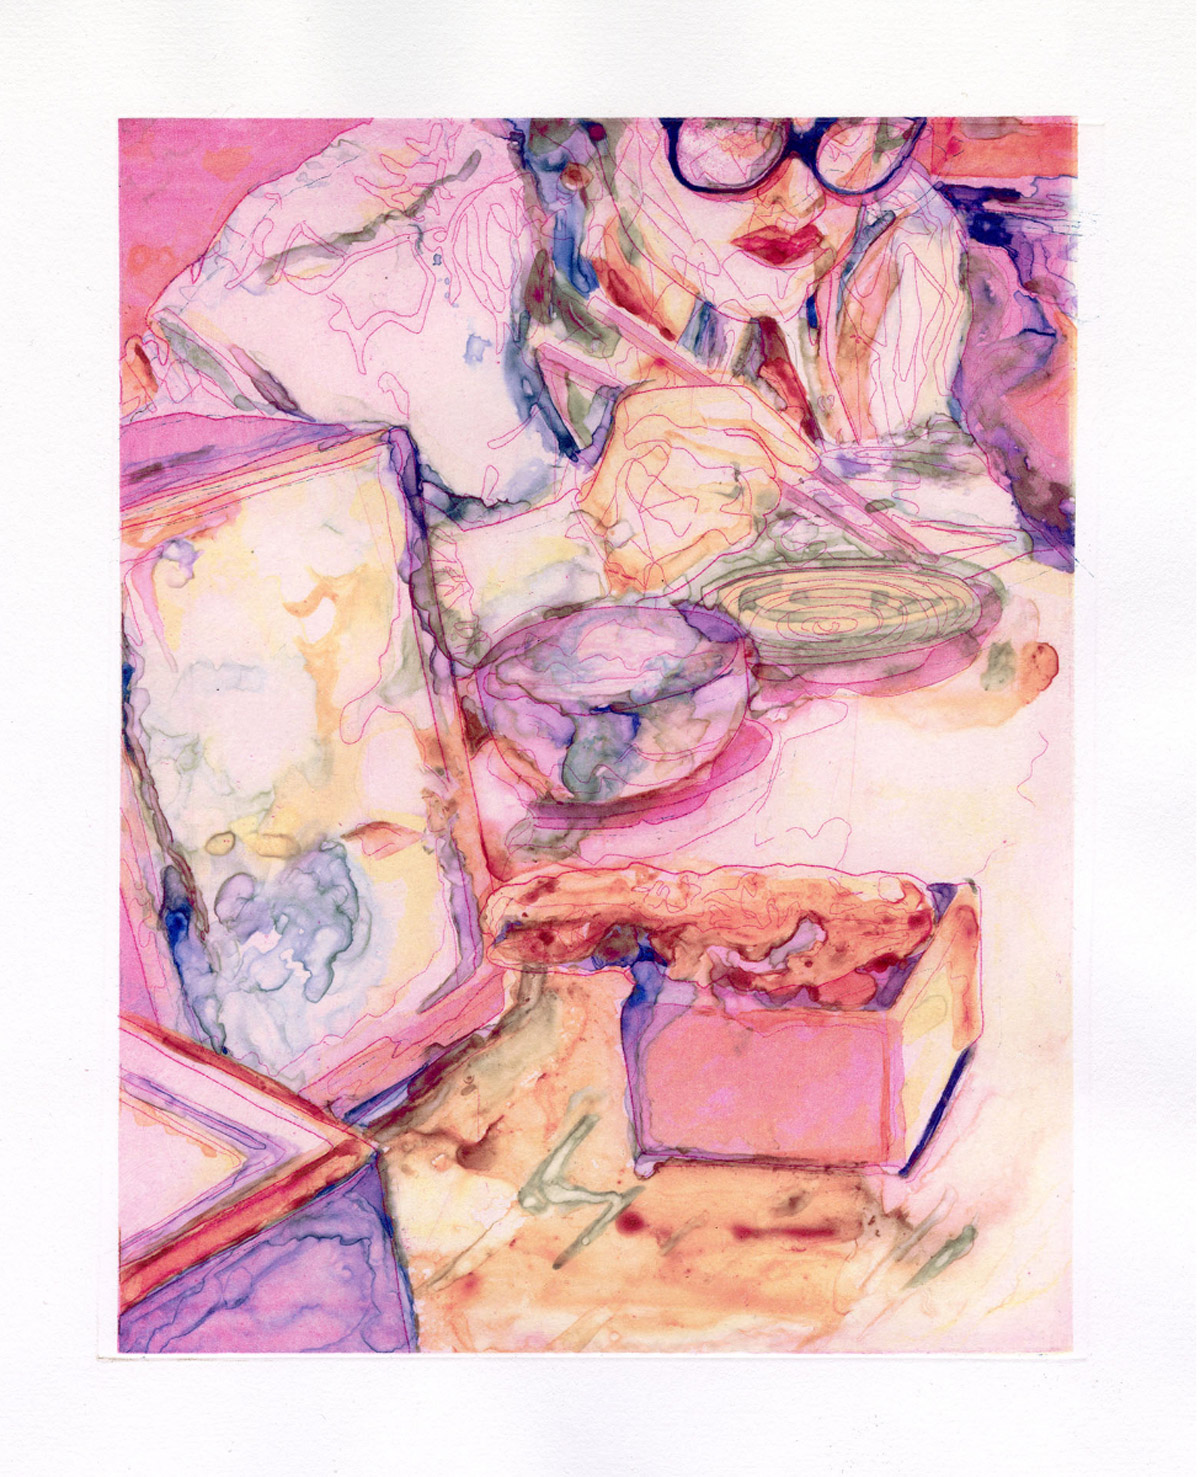 Young woman with glasses, holding chopsticks and hunched over small plates. Bright colors and thin pink lines form the figure and objects at the table.